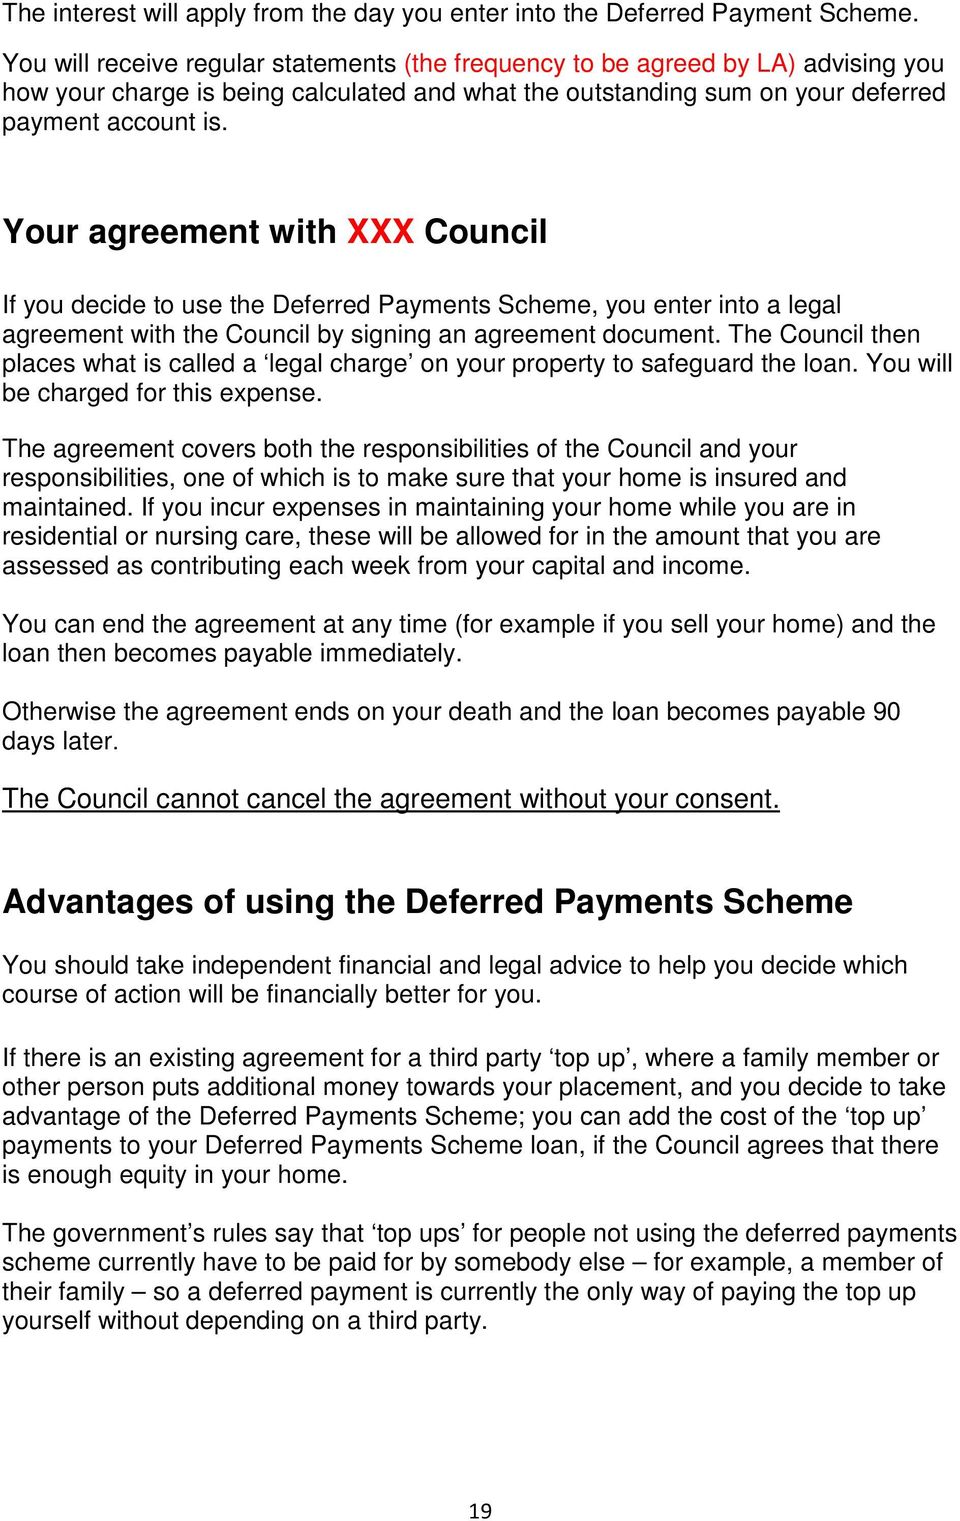 Your agreement with XXX Council If you decide to use the Deferred Payments Scheme, you enter into a legal agreement with the Council by signing an agreement document.